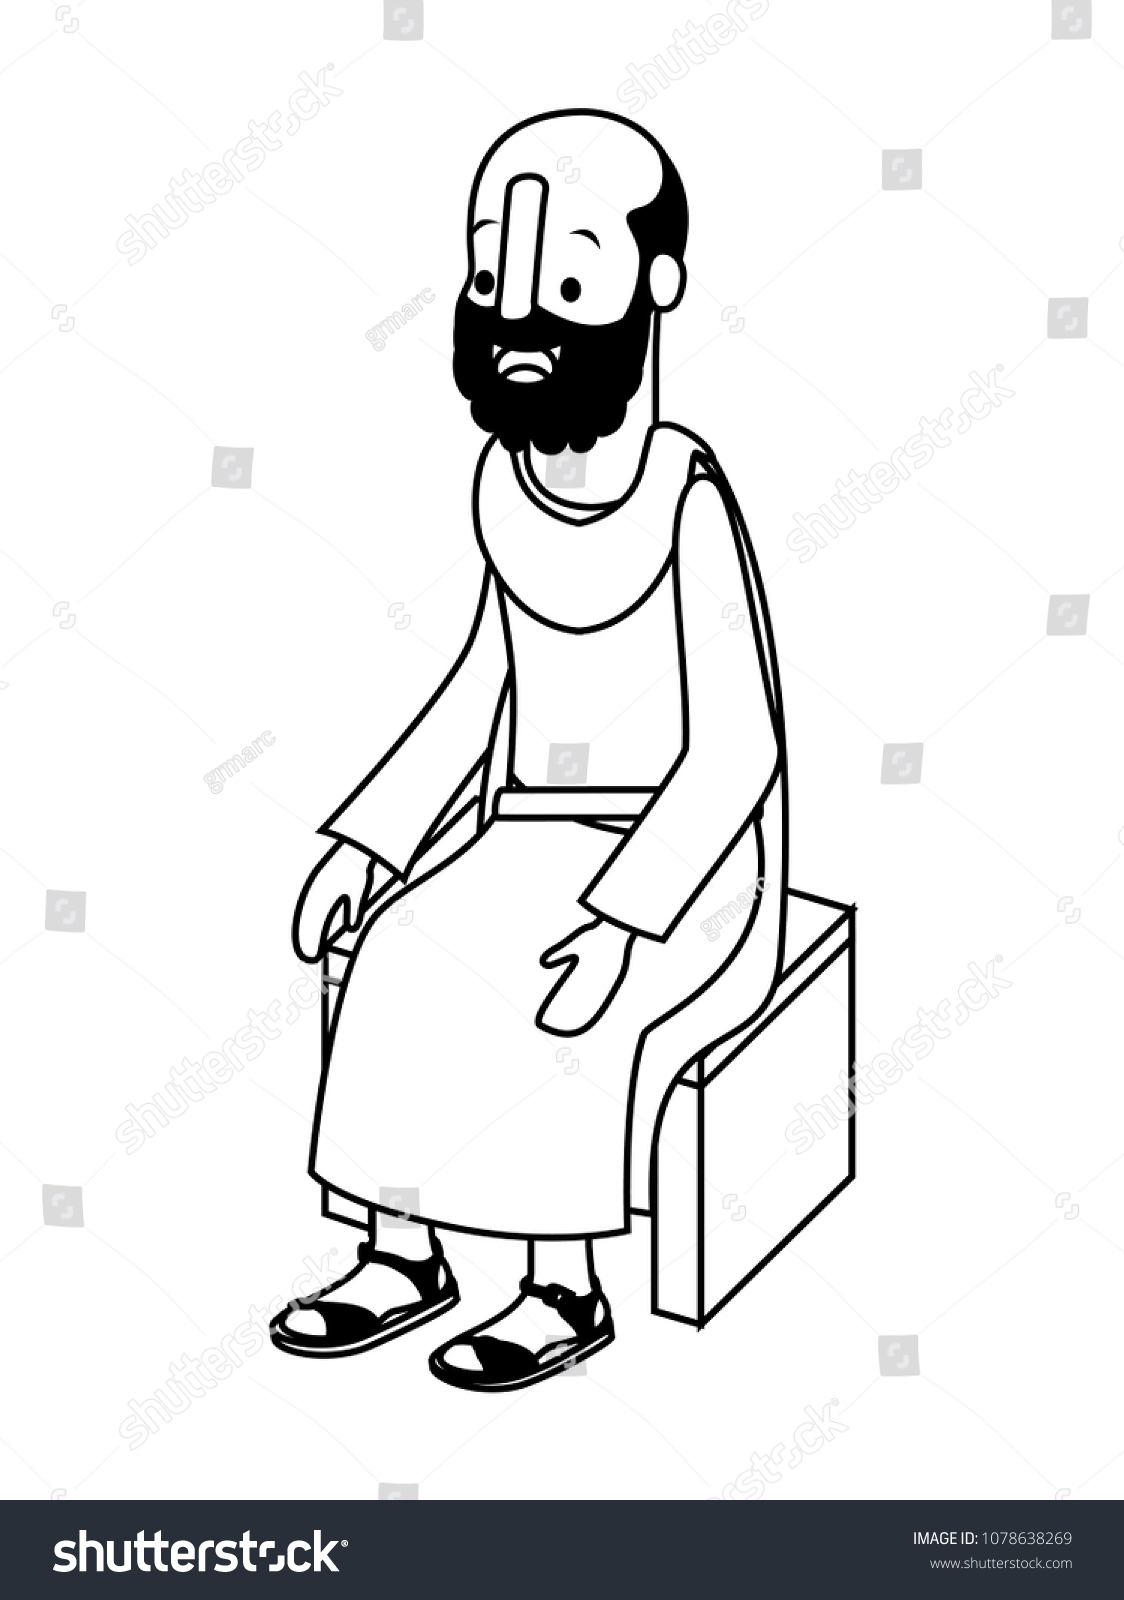 Apostle Of Jesus Sitting On Wooden Chair Royalty Free Stock Vector